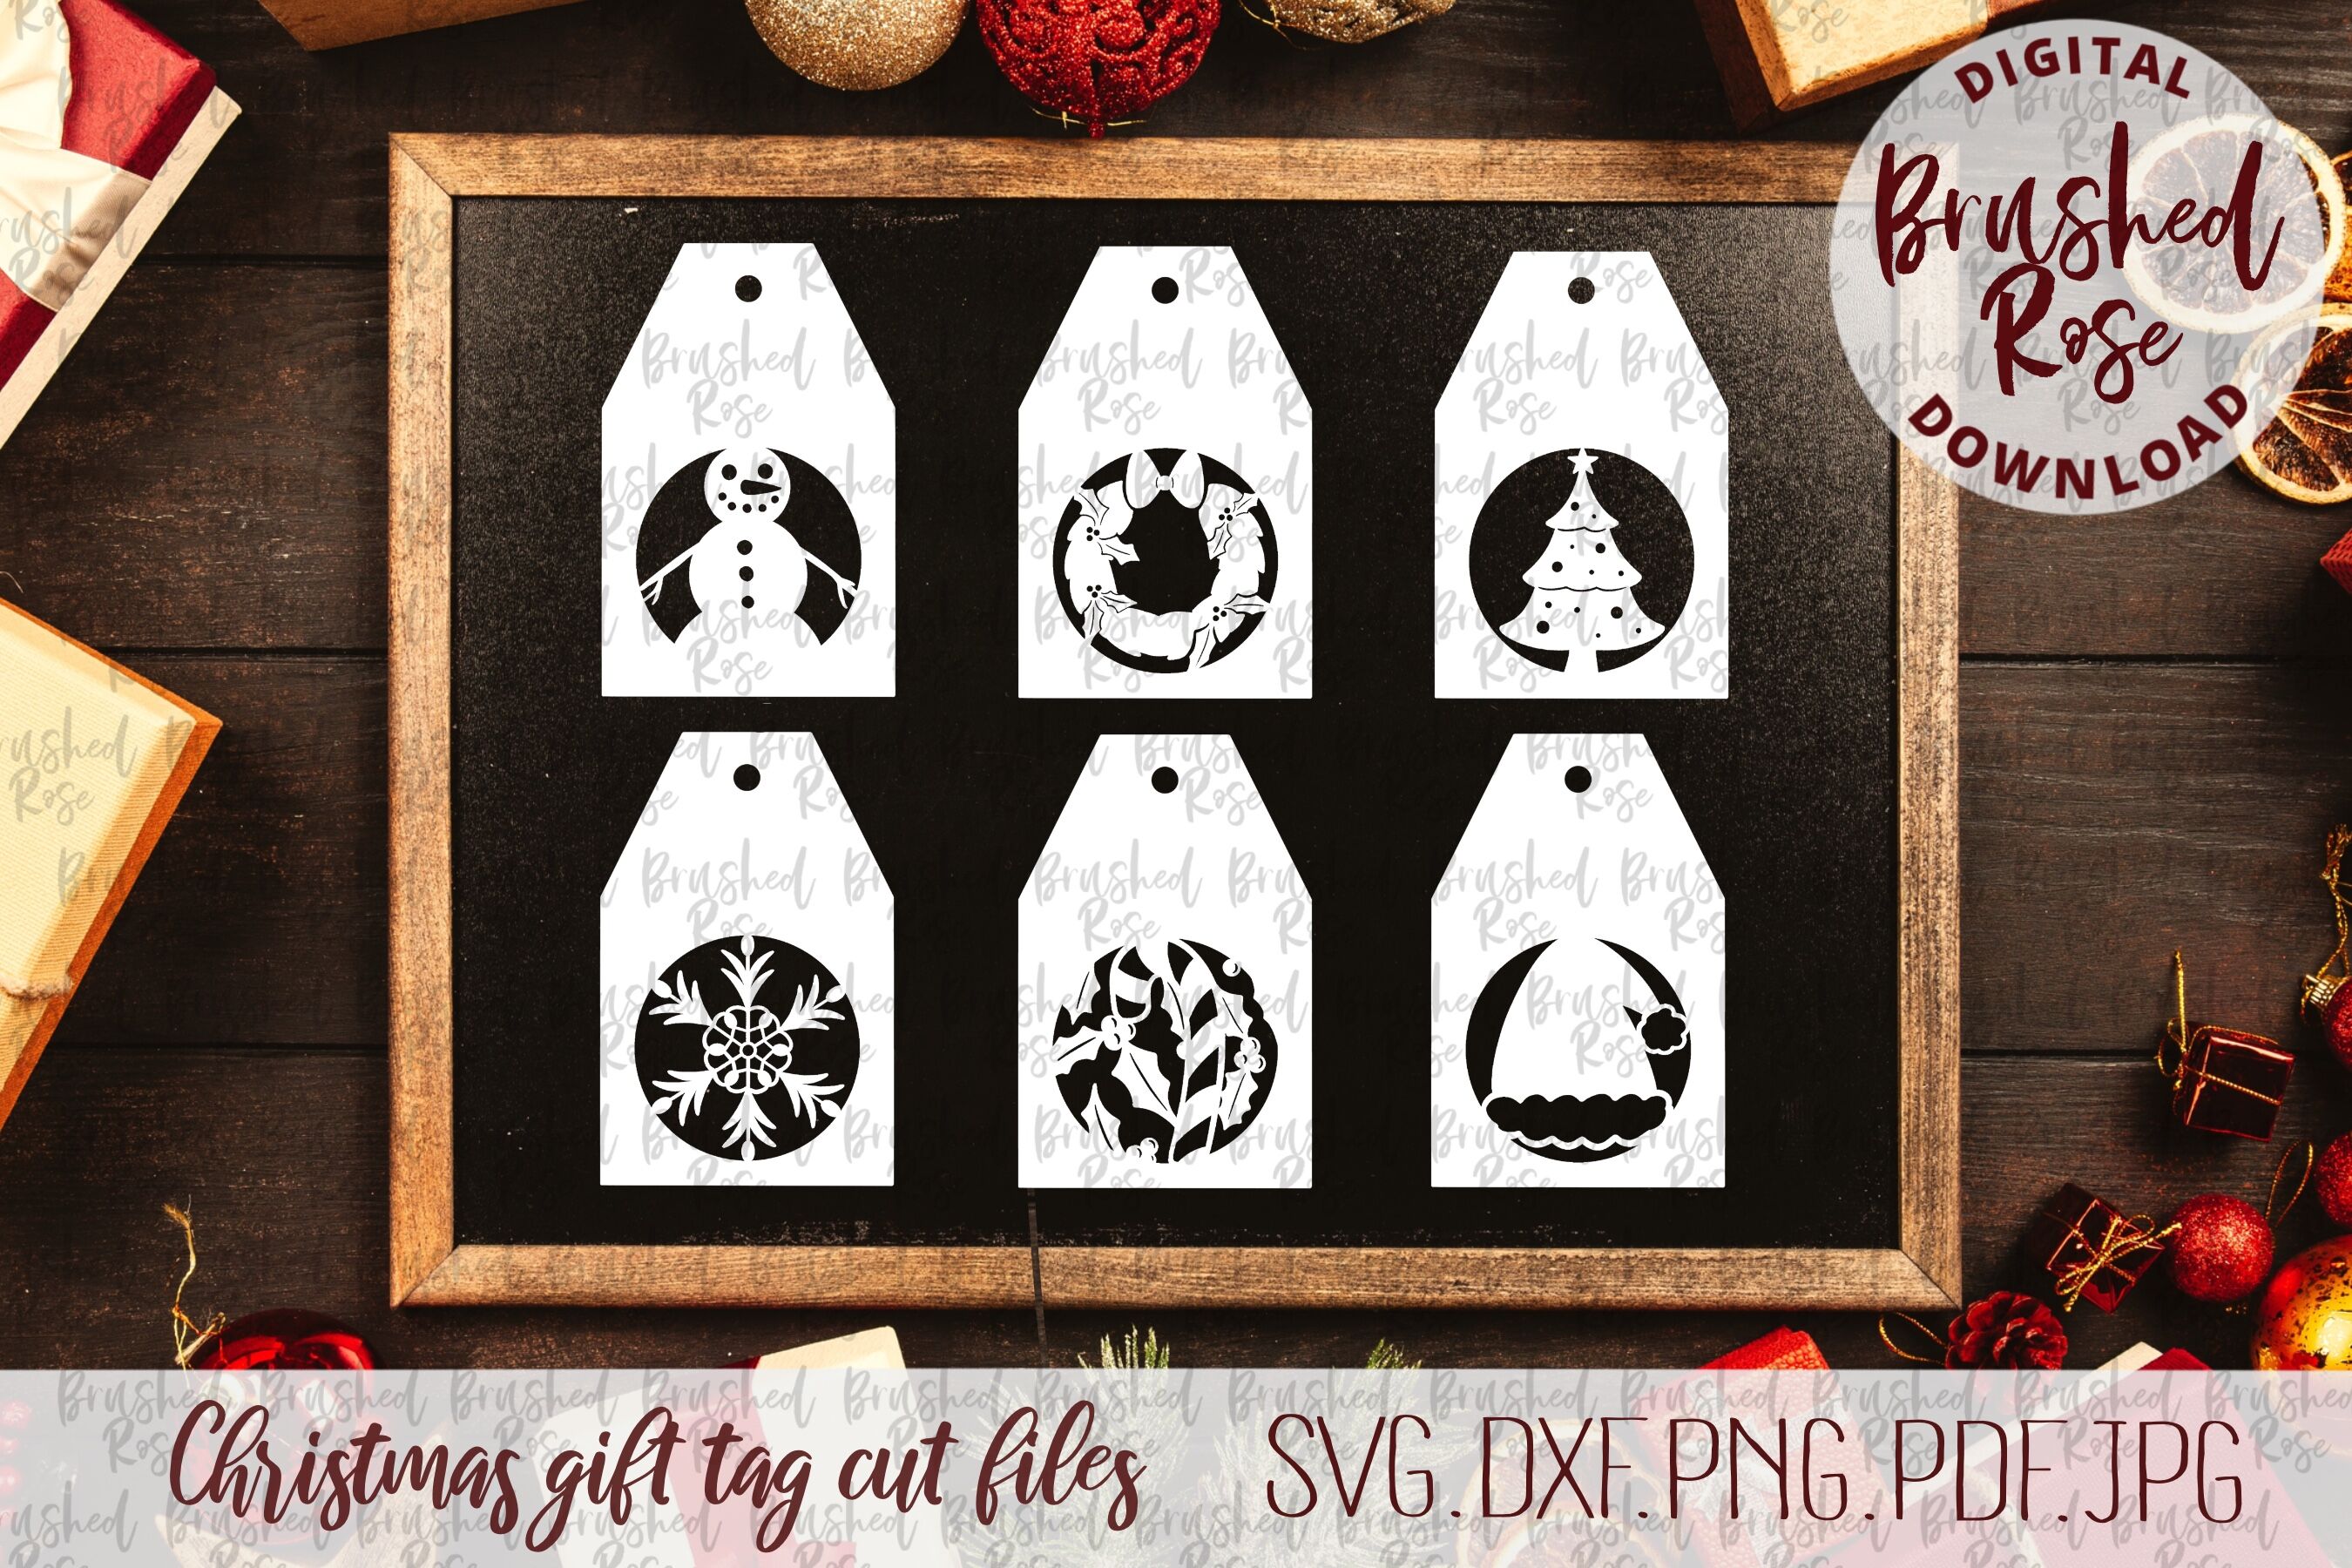 Download Christmas Gift Tags Cut File Svg By Brushed Rose Digital Thehungryjpeg Com